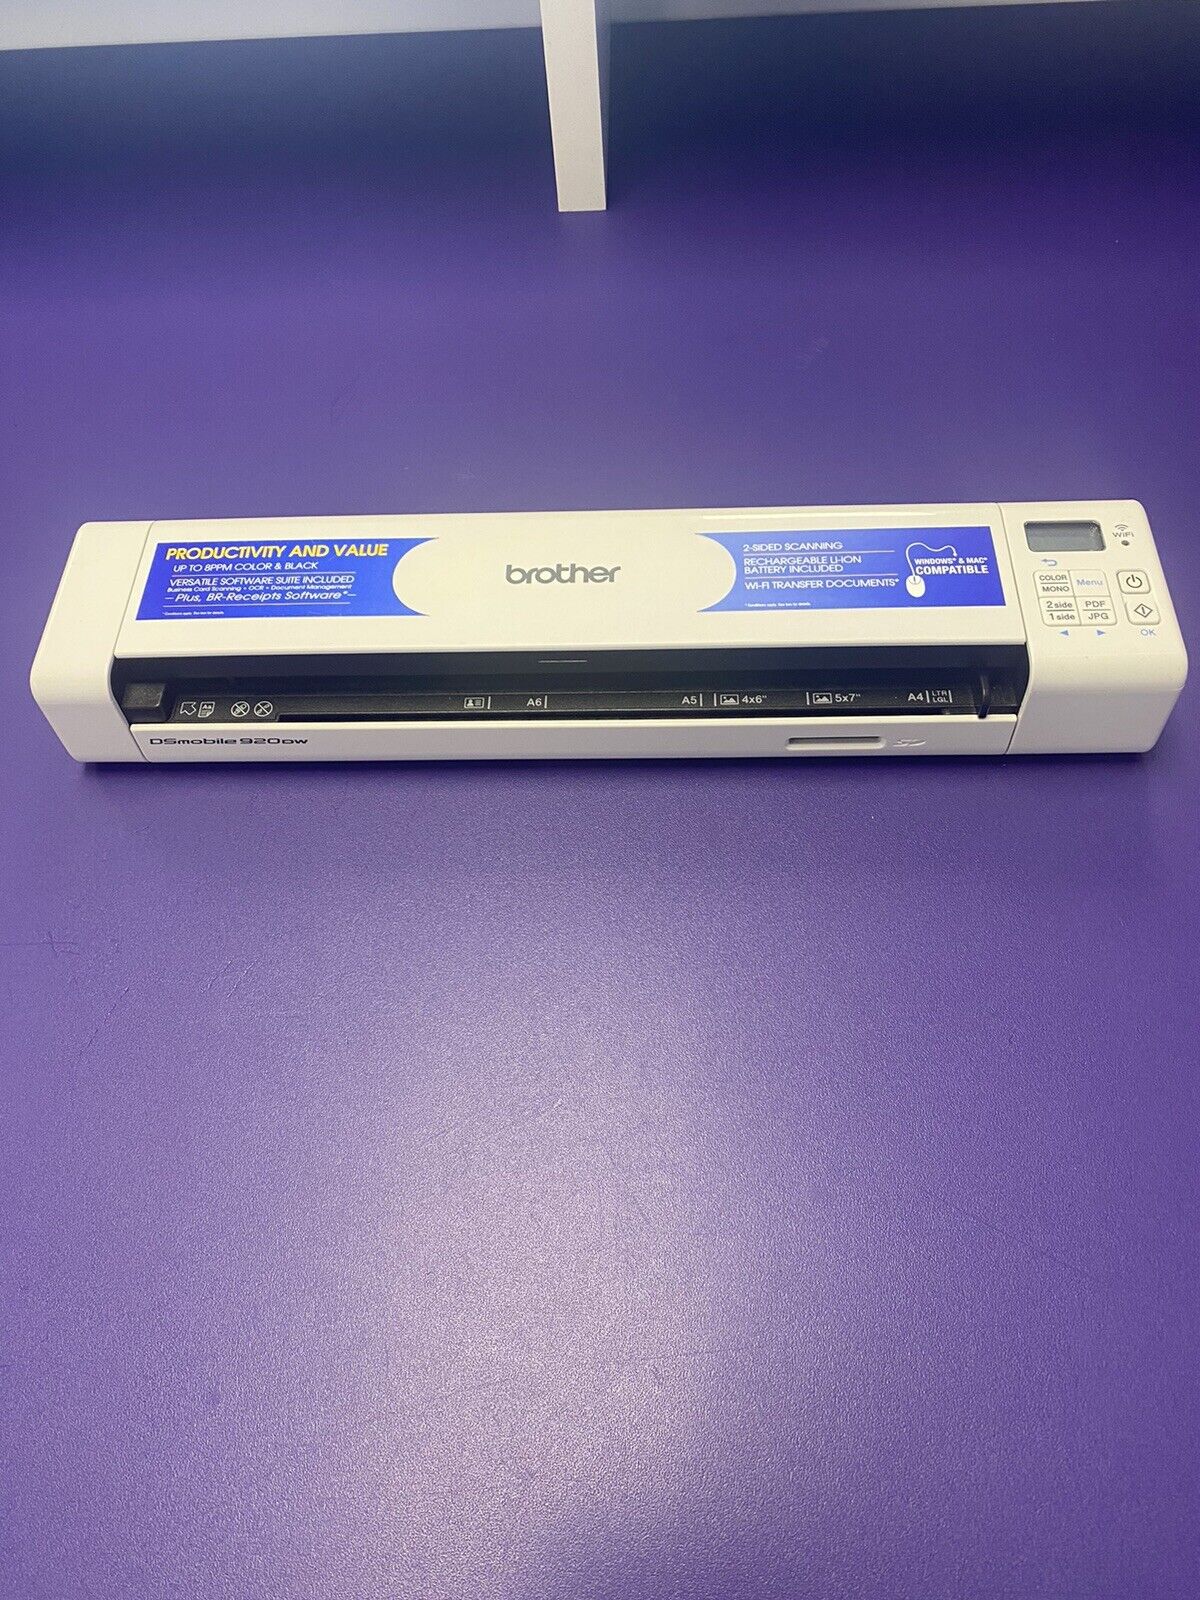 Brother DS-920DW Duplex & Wireless Compact Mobile Document Scanner